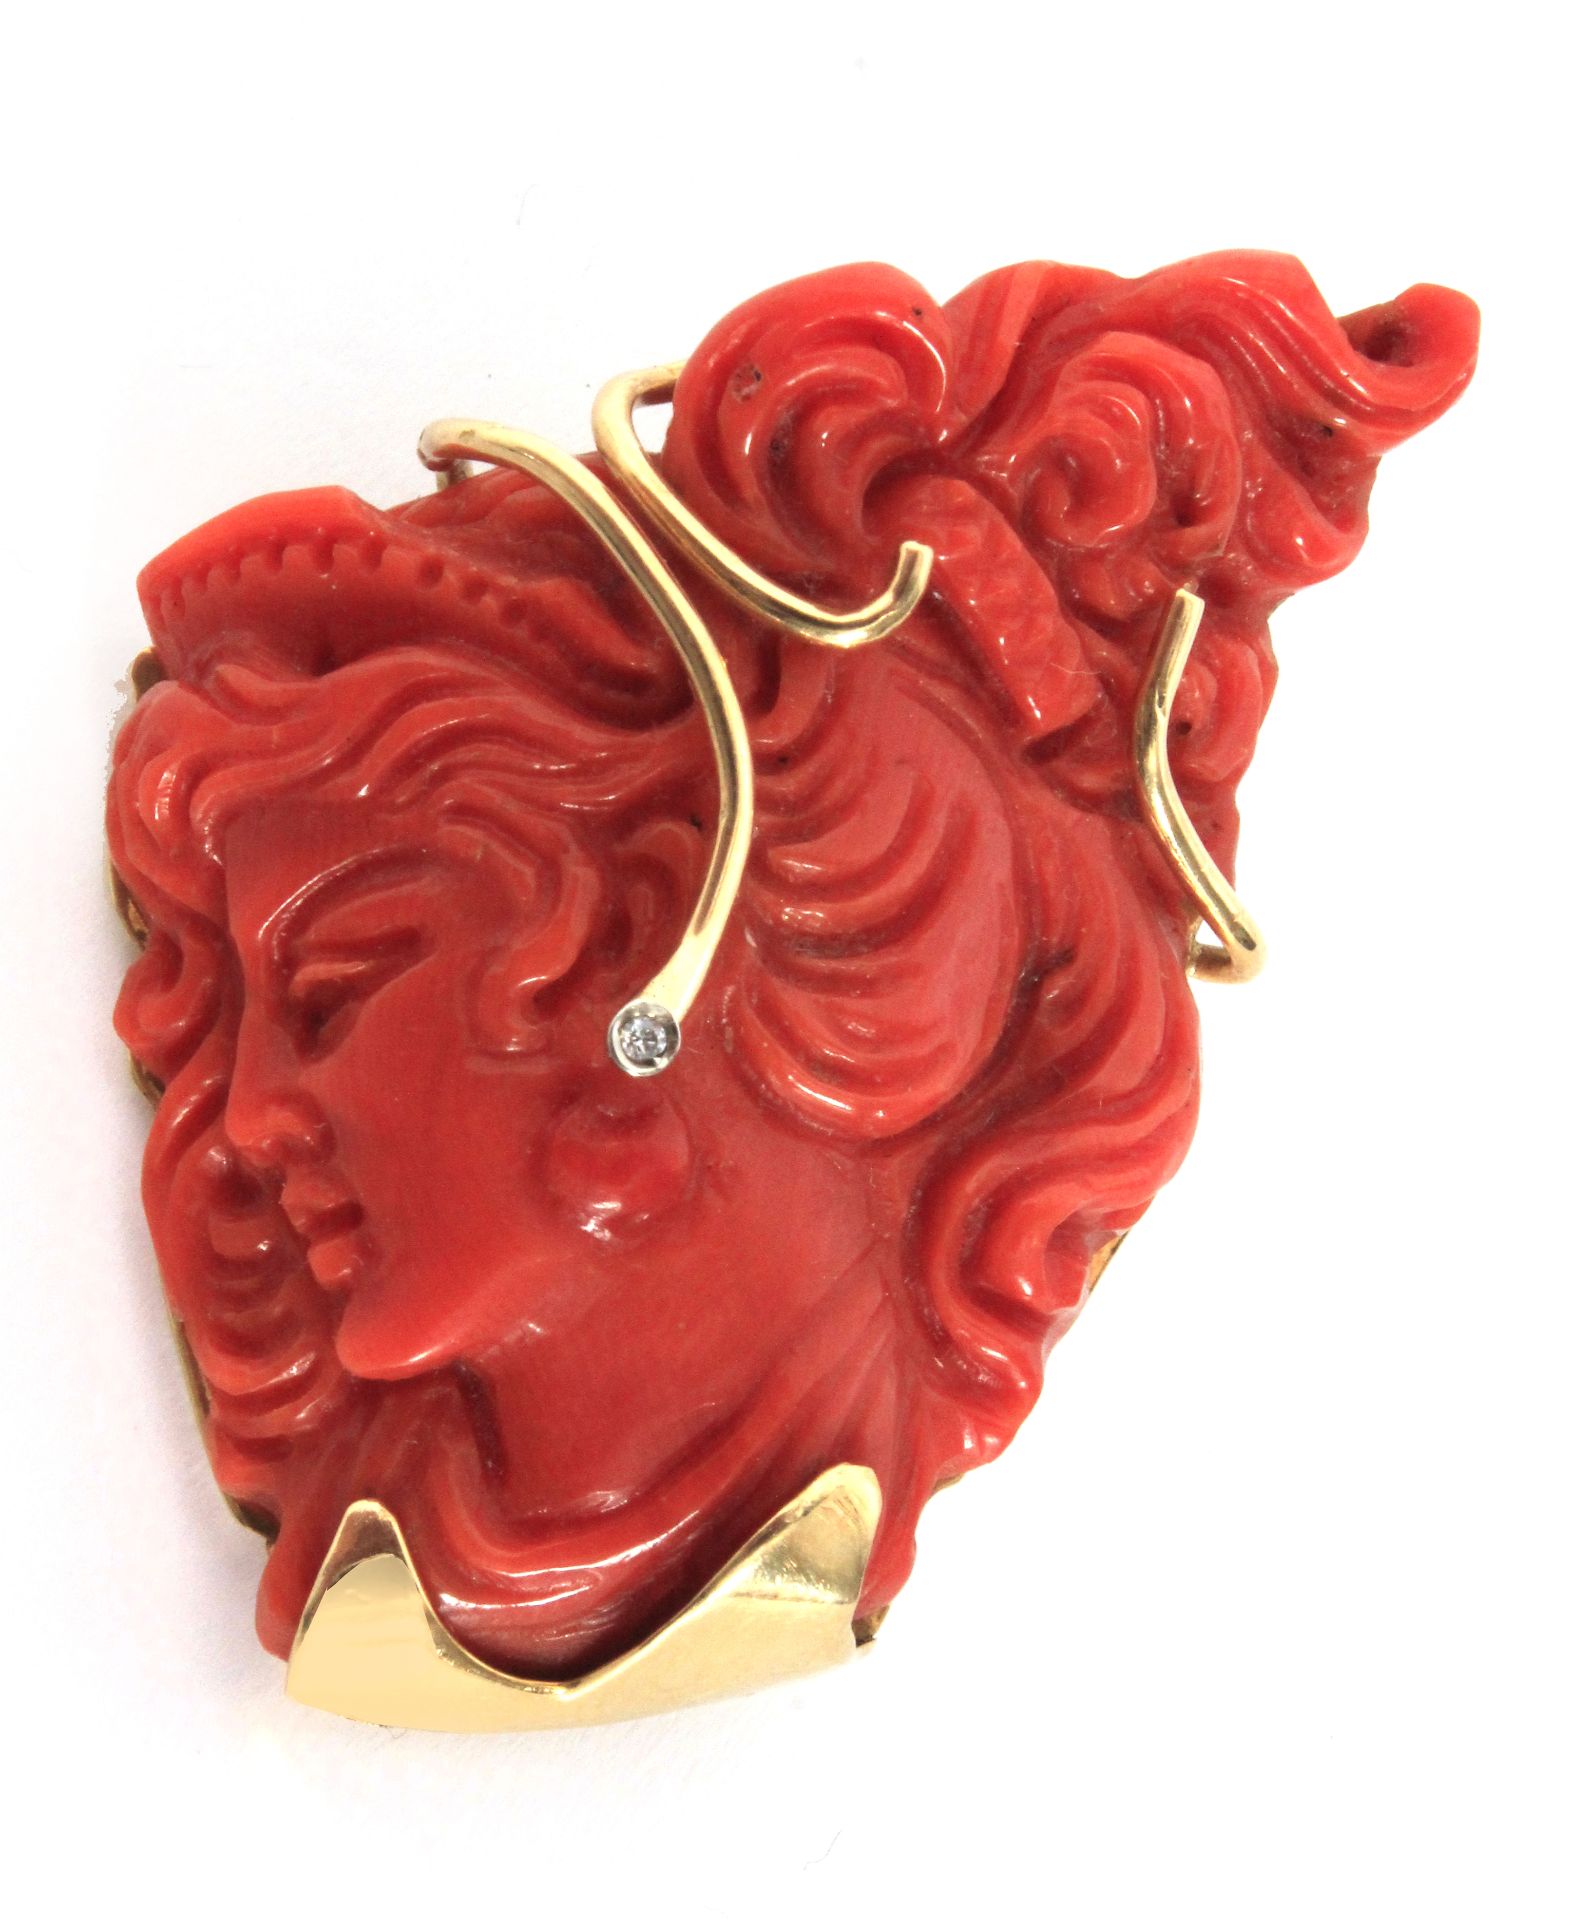 A carved red coral from the Mediterranean Sea root pendant with an 18 k. yellow gold setting